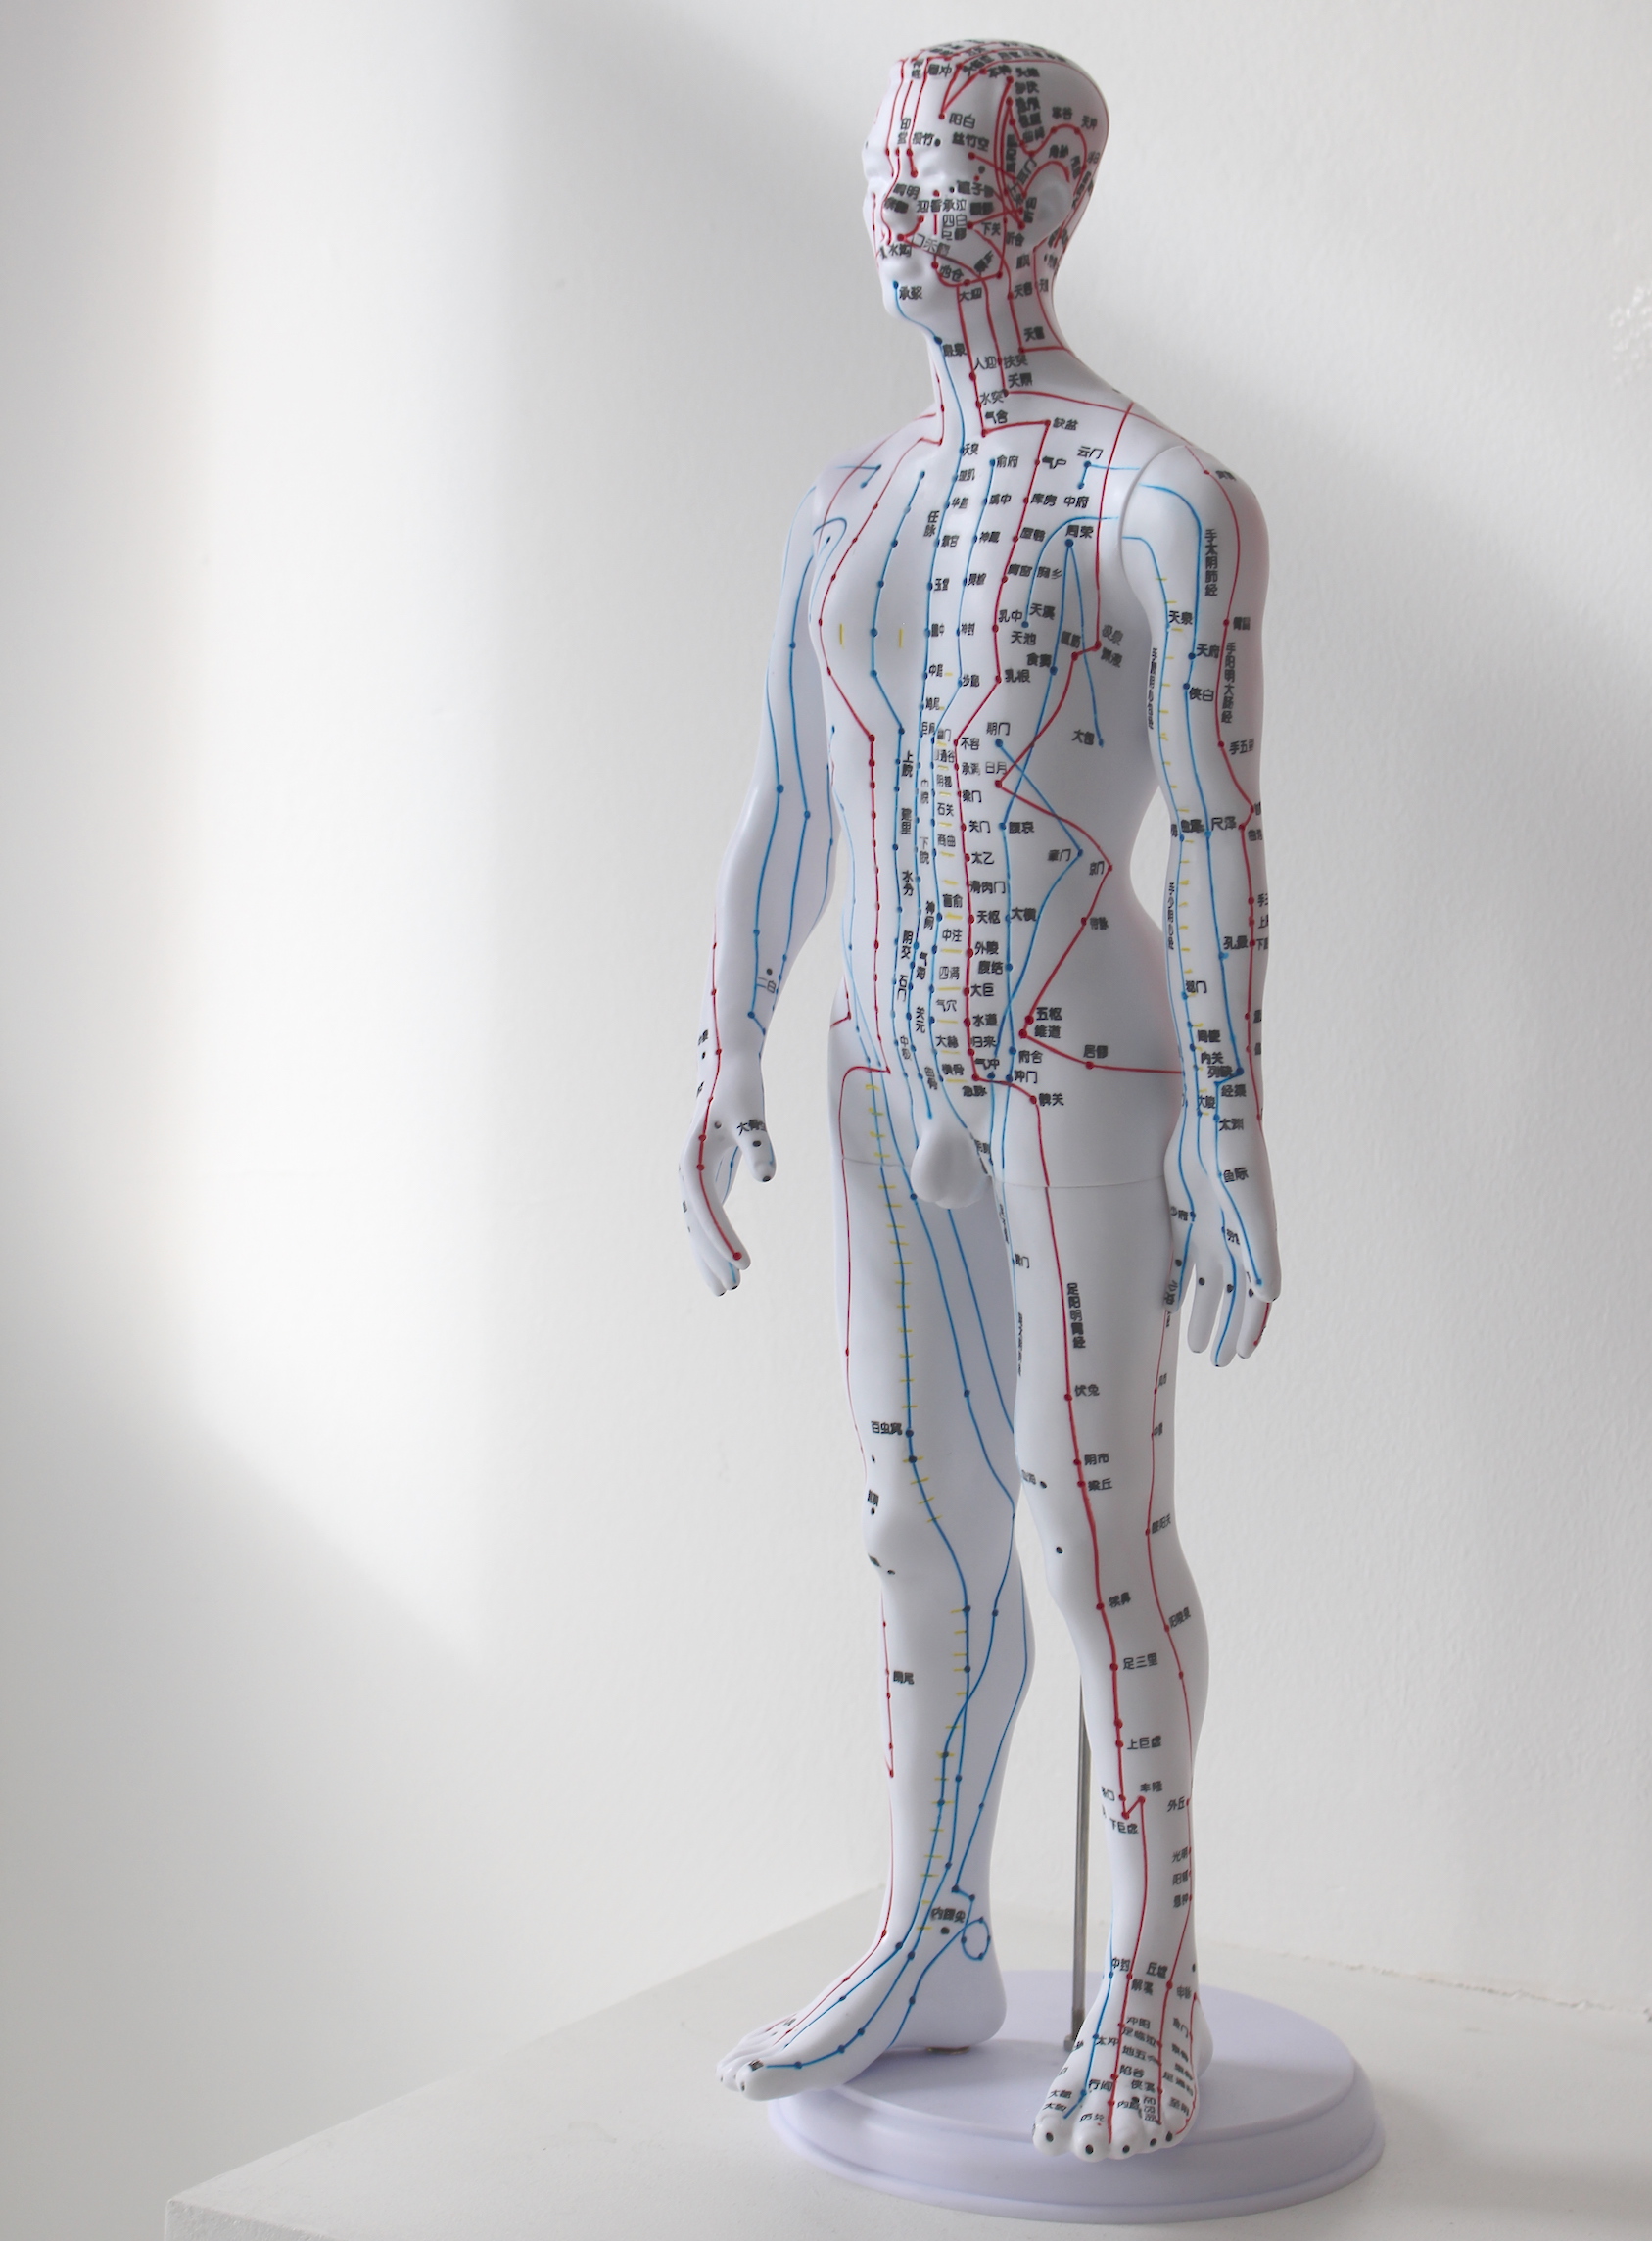 Figure representing acupuncture points